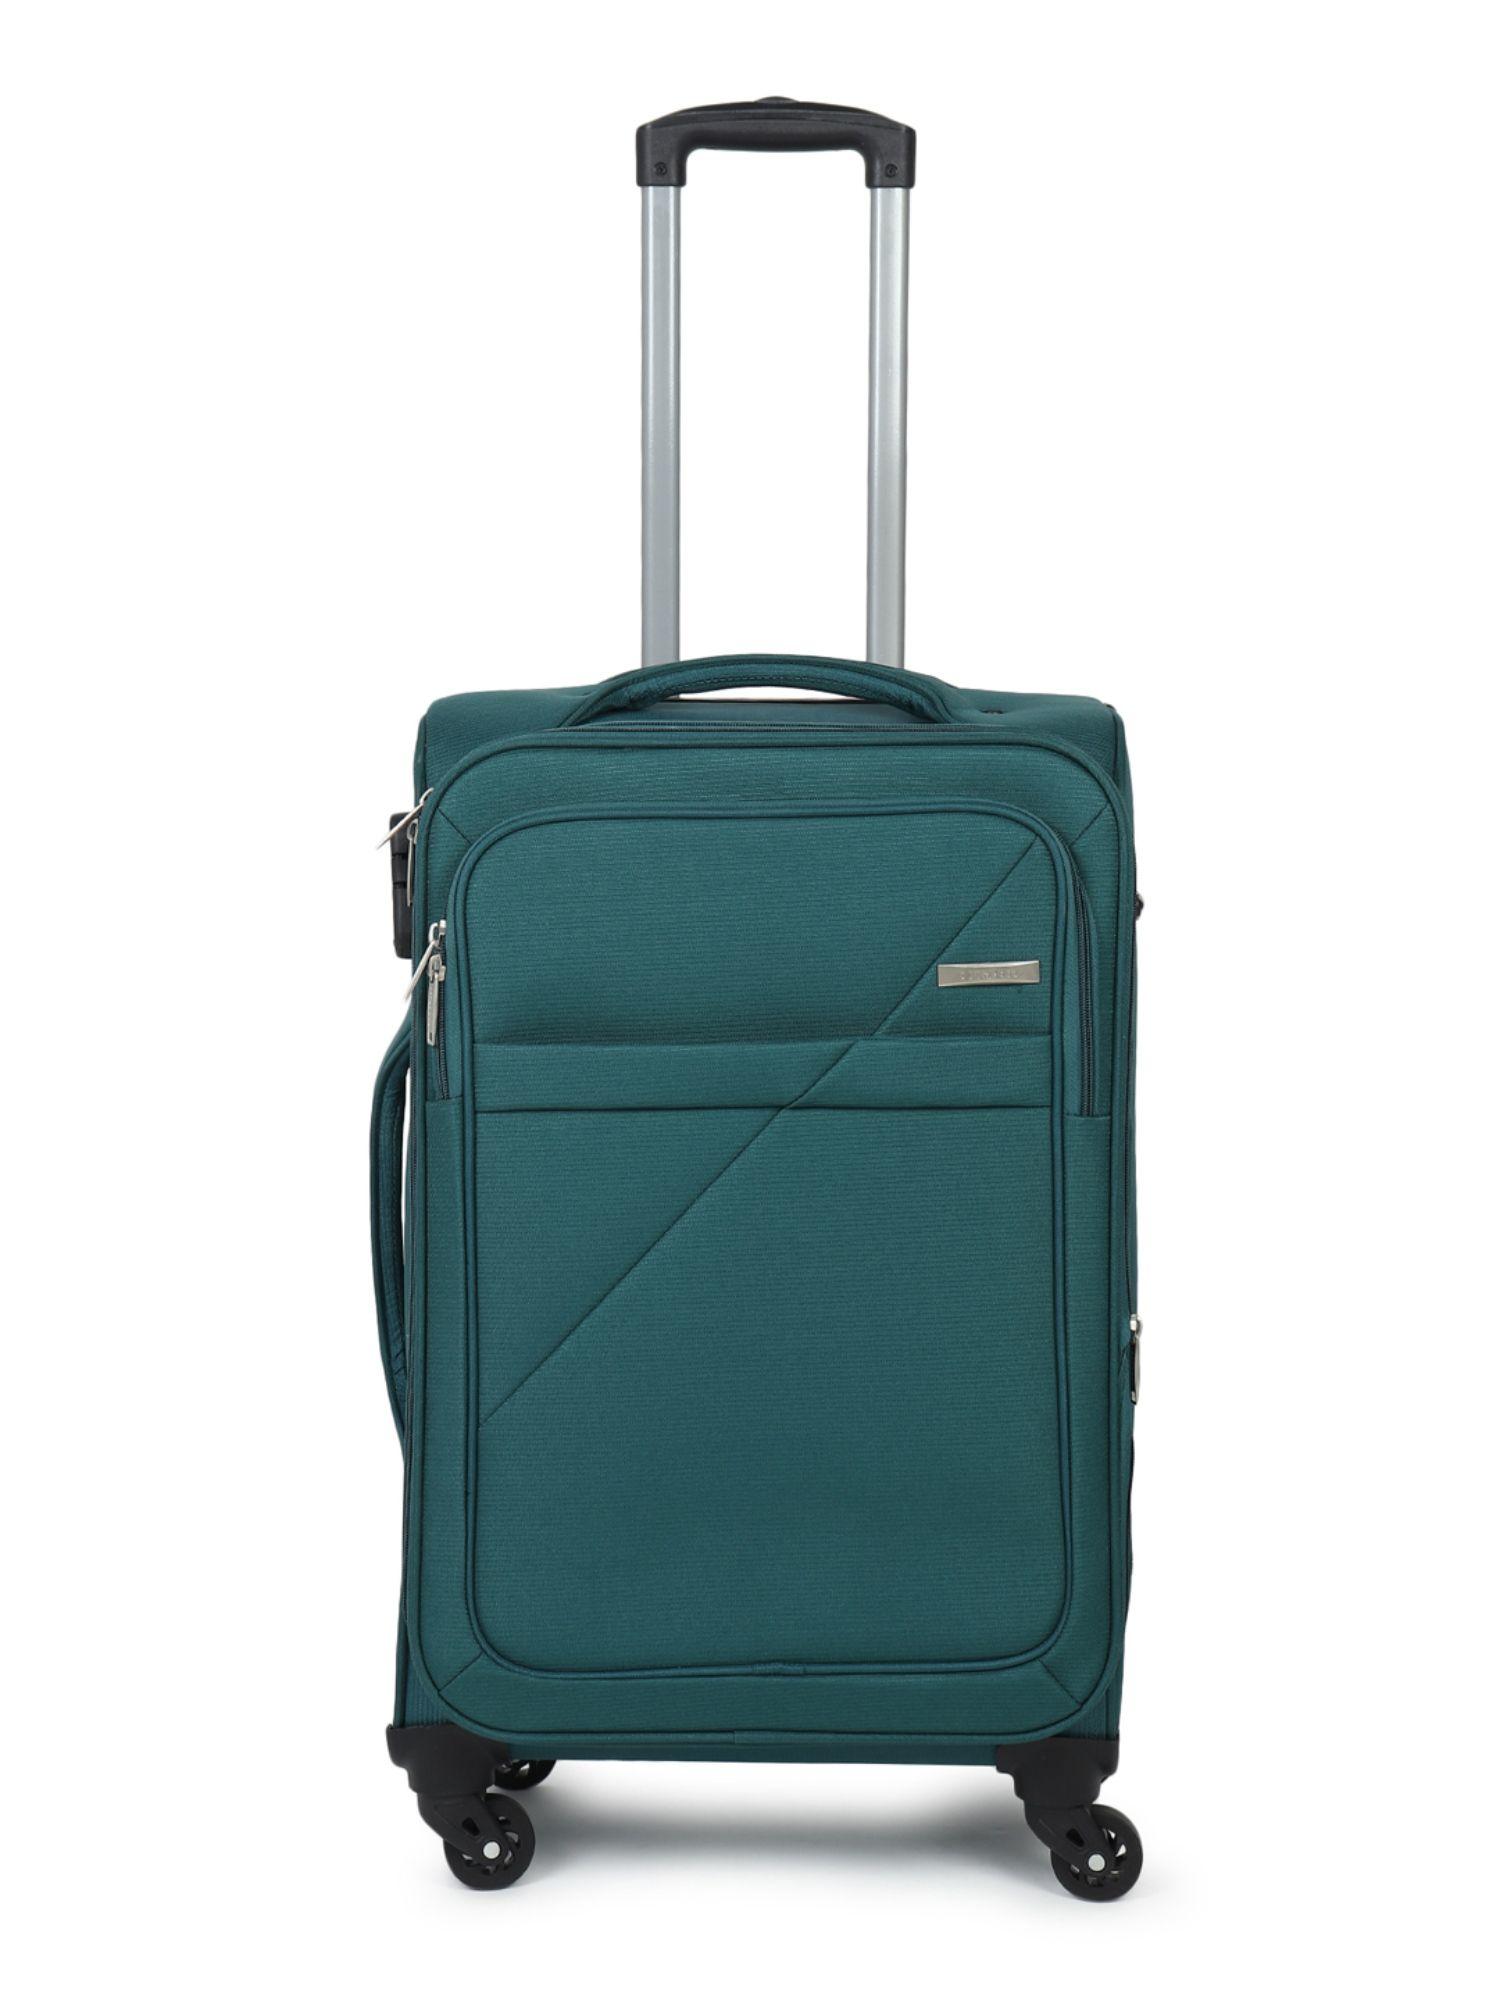 unisex-teal-solid-soft-sided-medium-size-check-in-trolley-bag